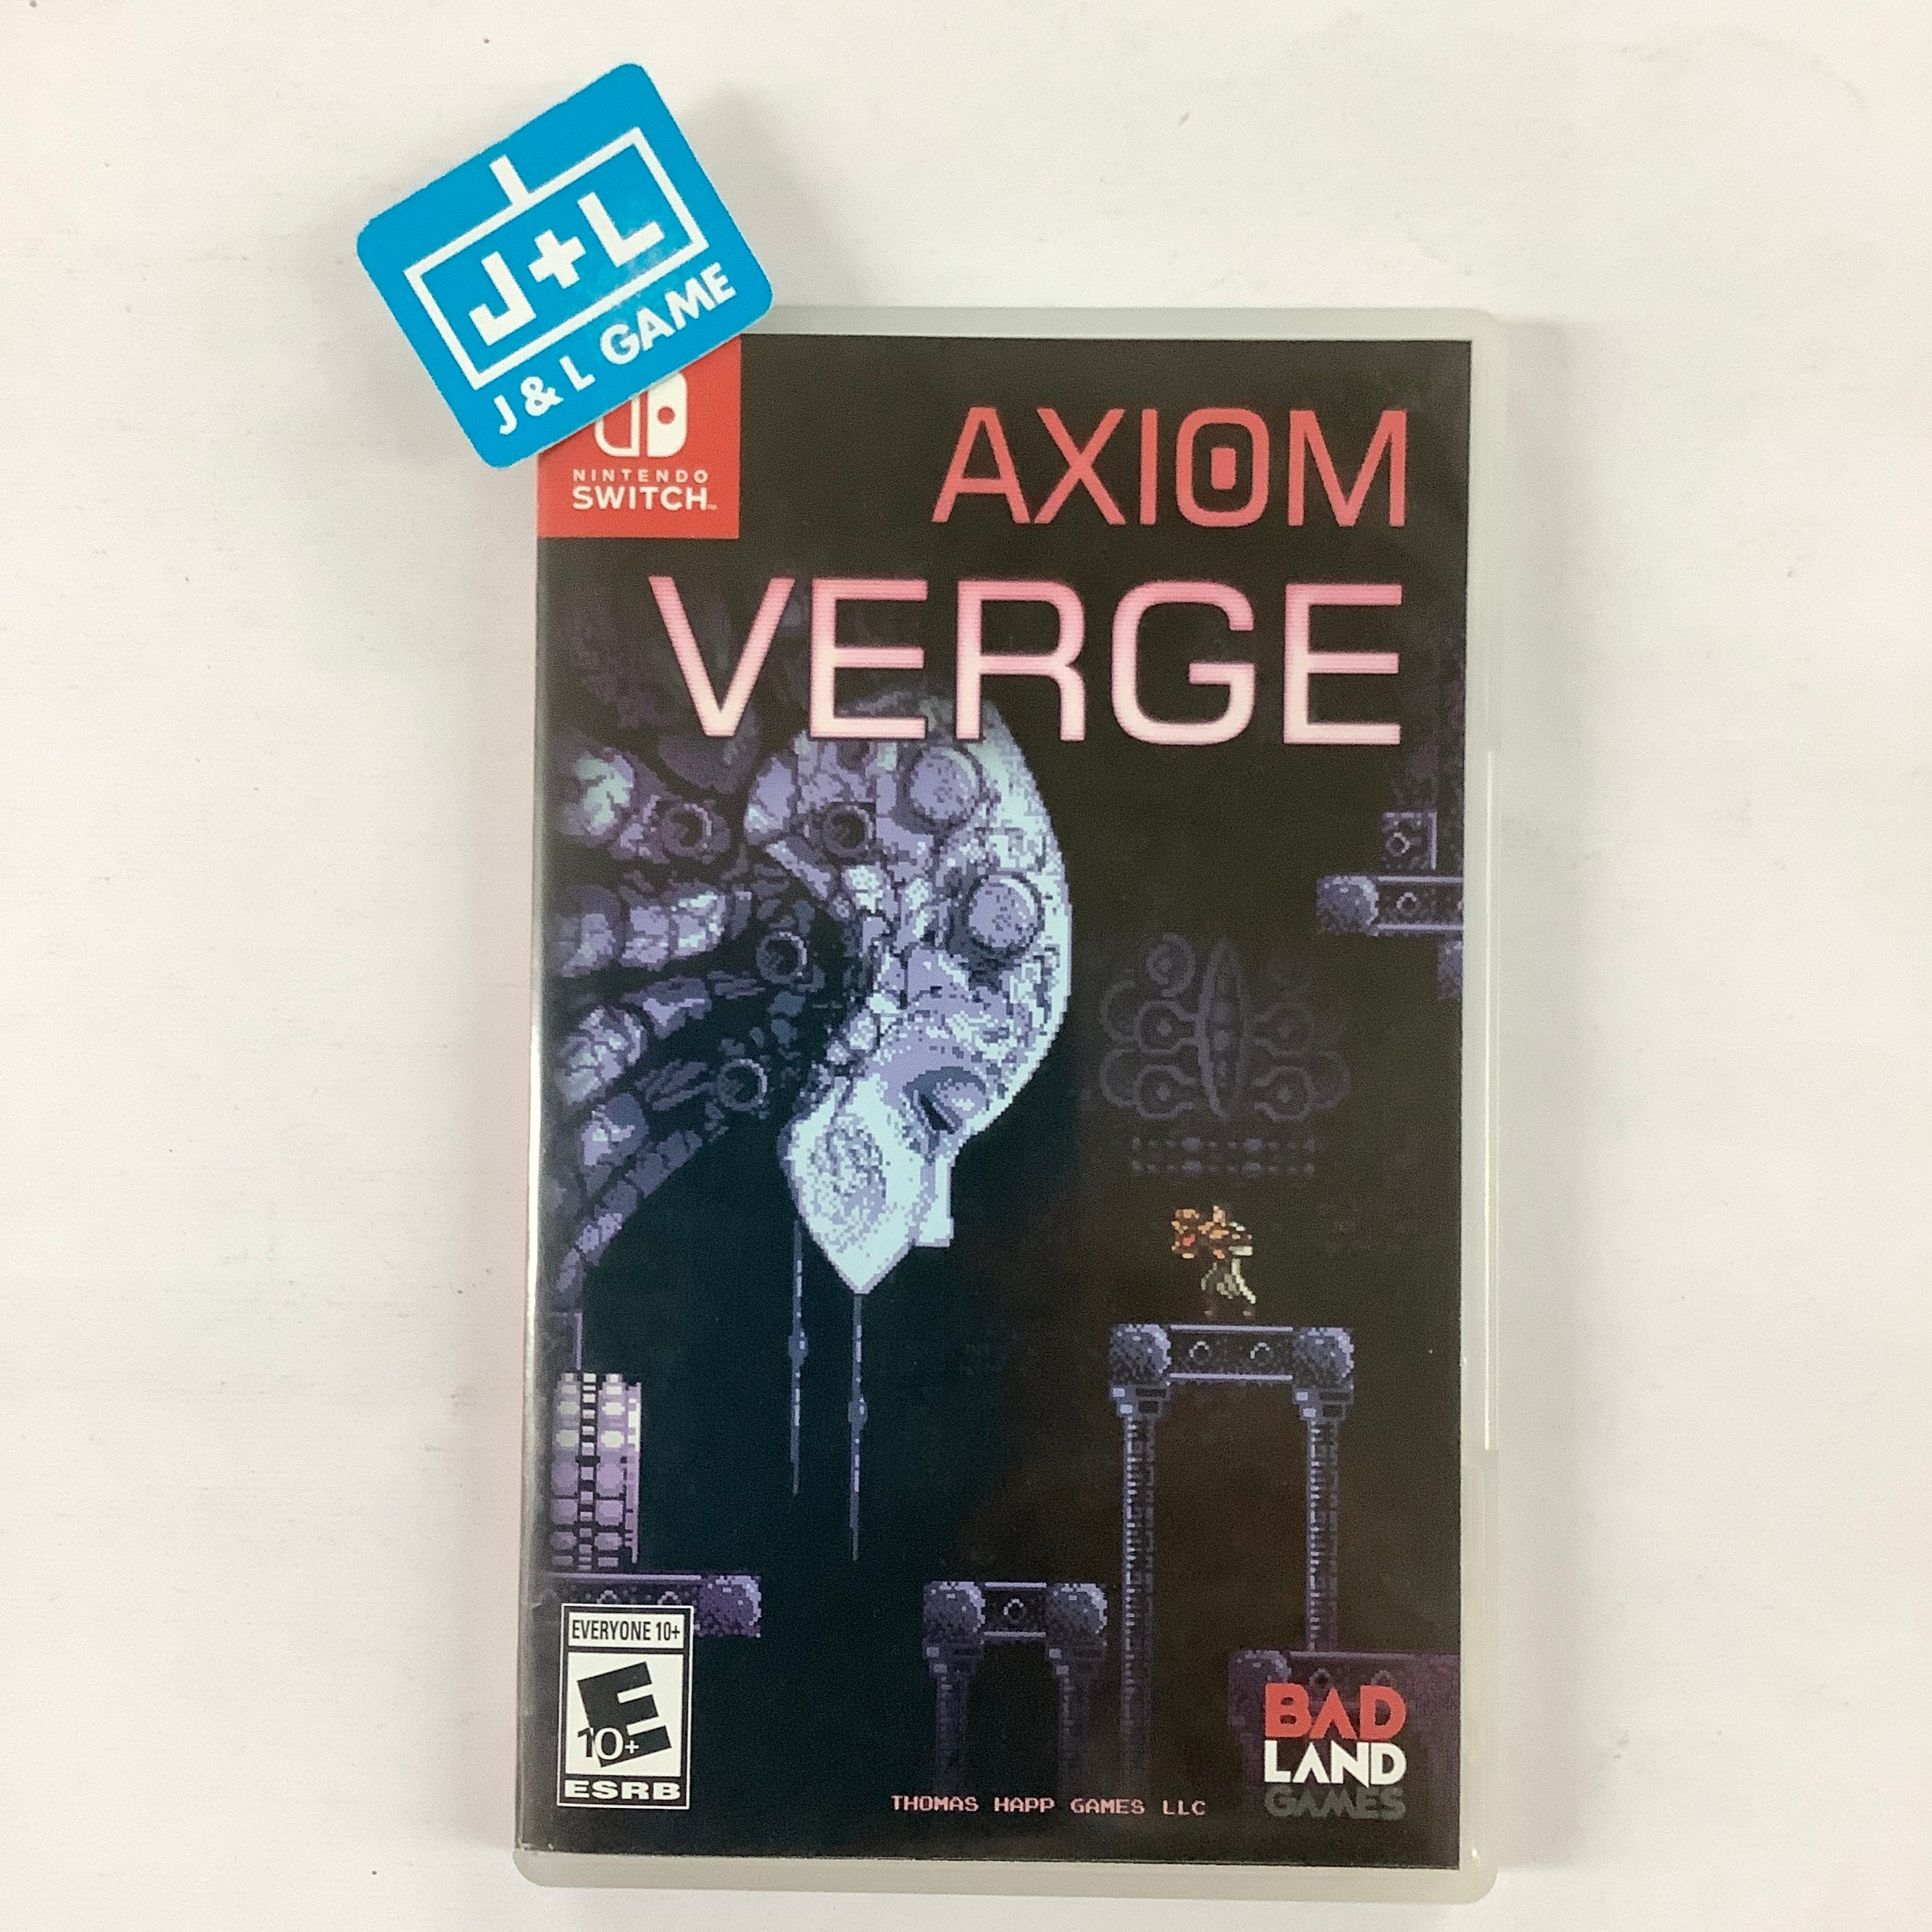 Axiom Verge: Multiverse Edition - (NSW) Nintendo Switch [Pre-Owned] Video Games Badland Games   